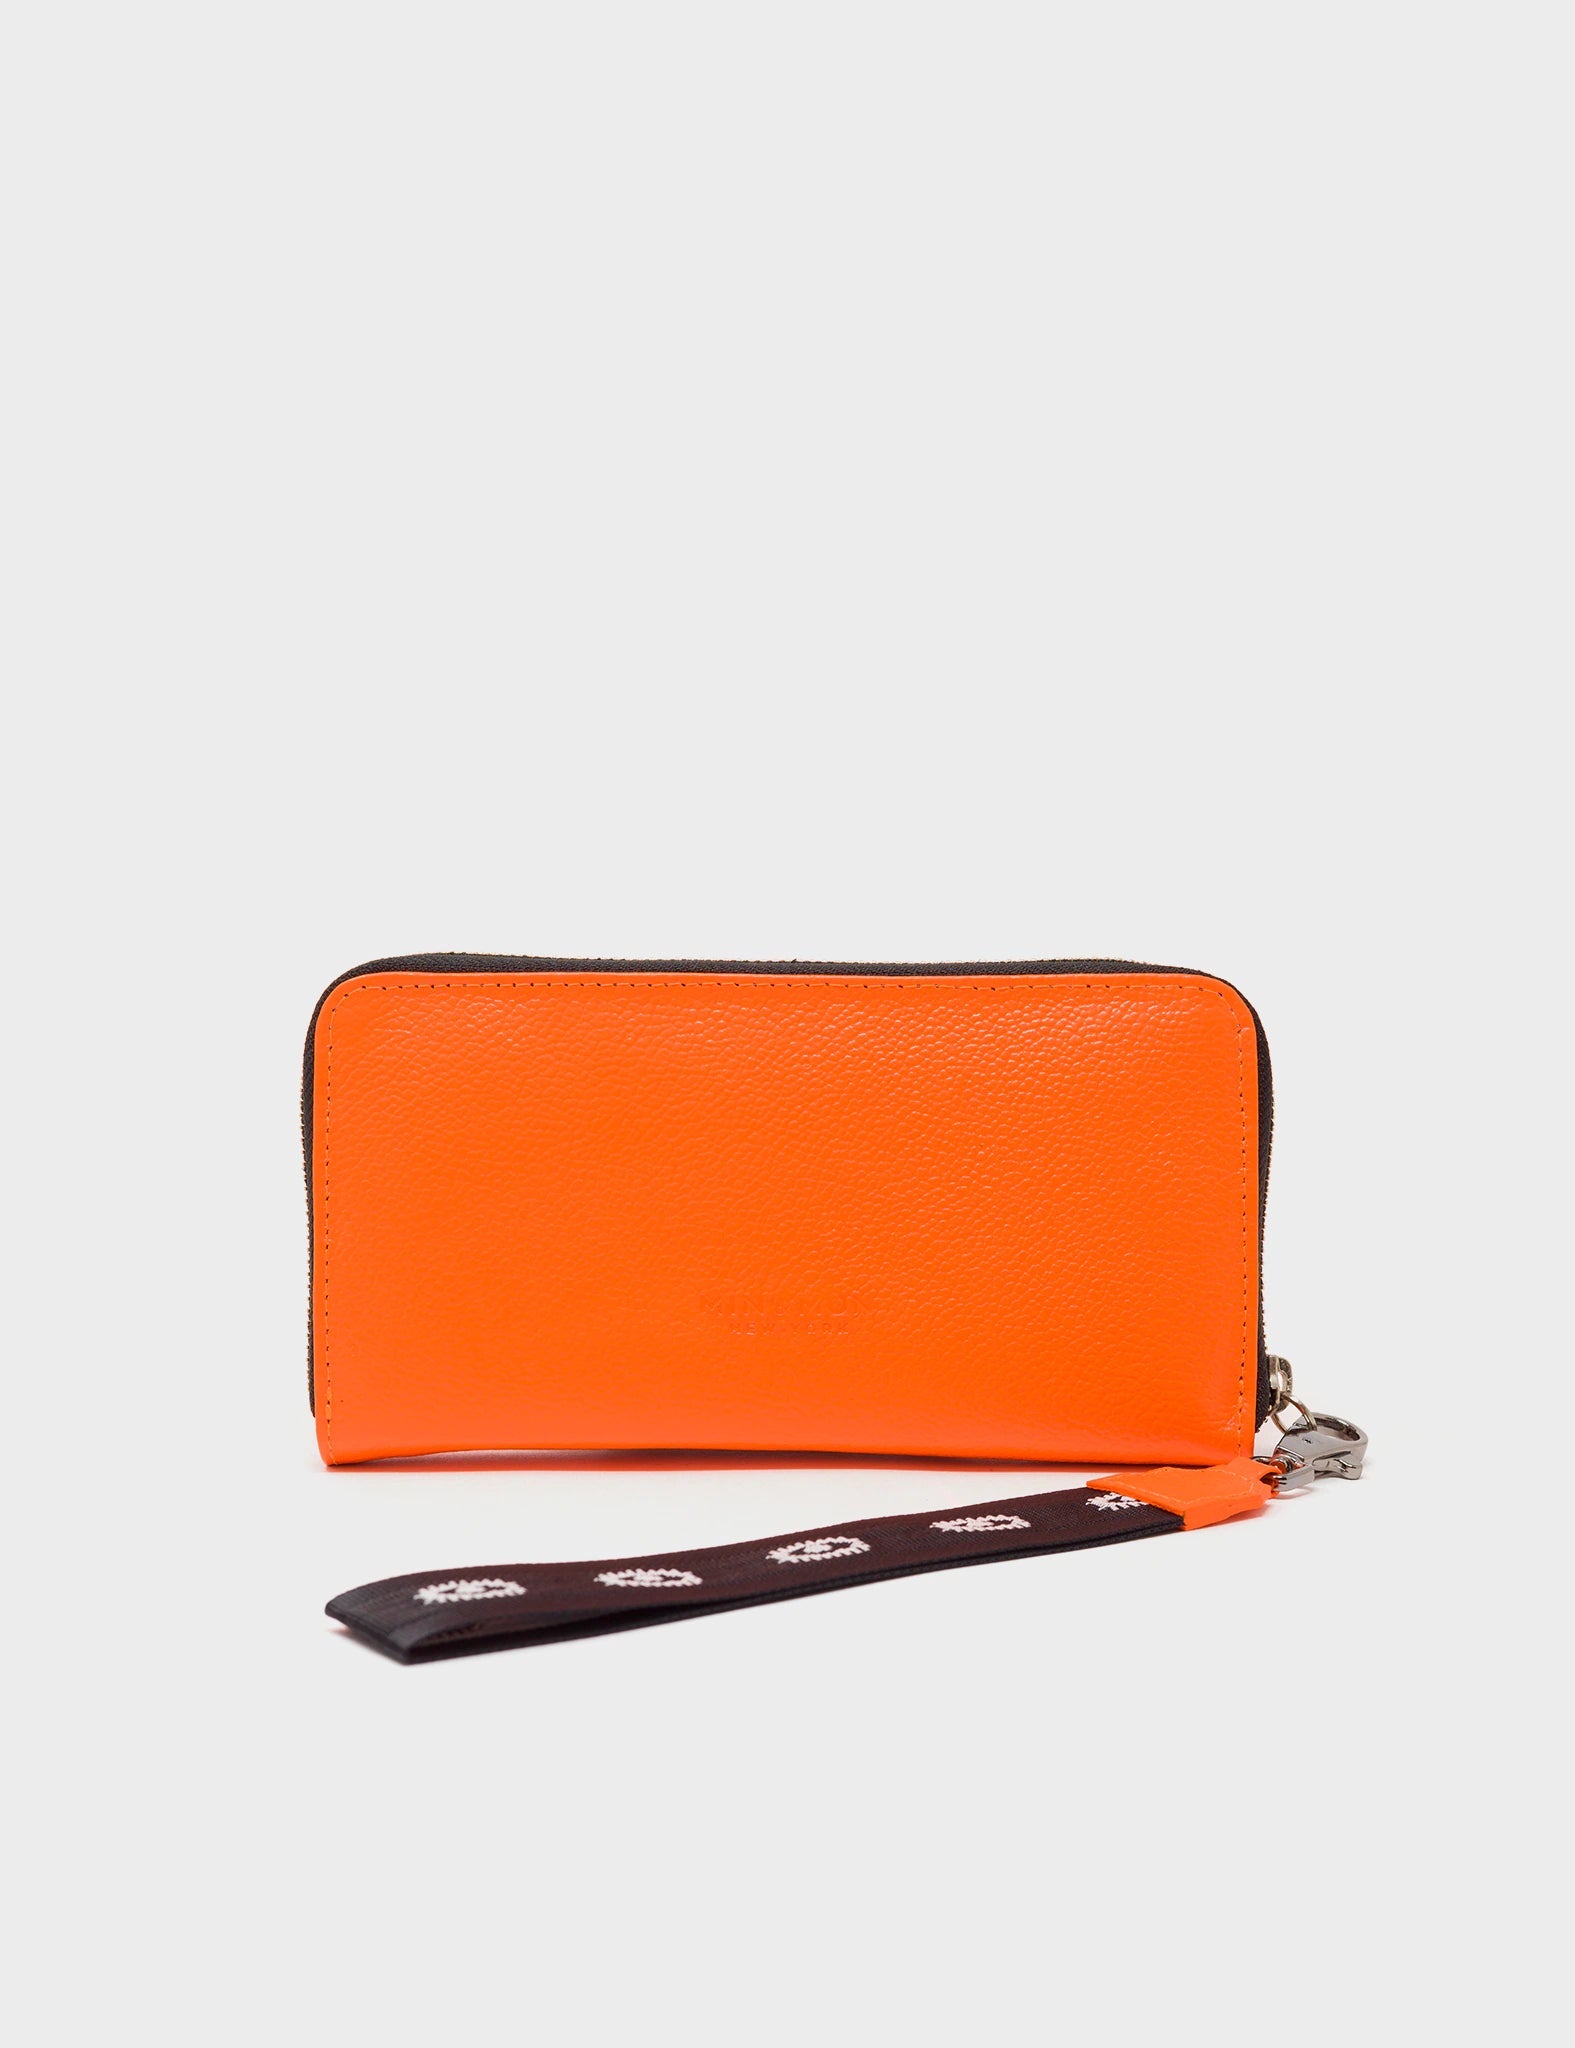 Francis Neon Orange Leather Wallet - All Over Eyes Embroidery Print - Back view